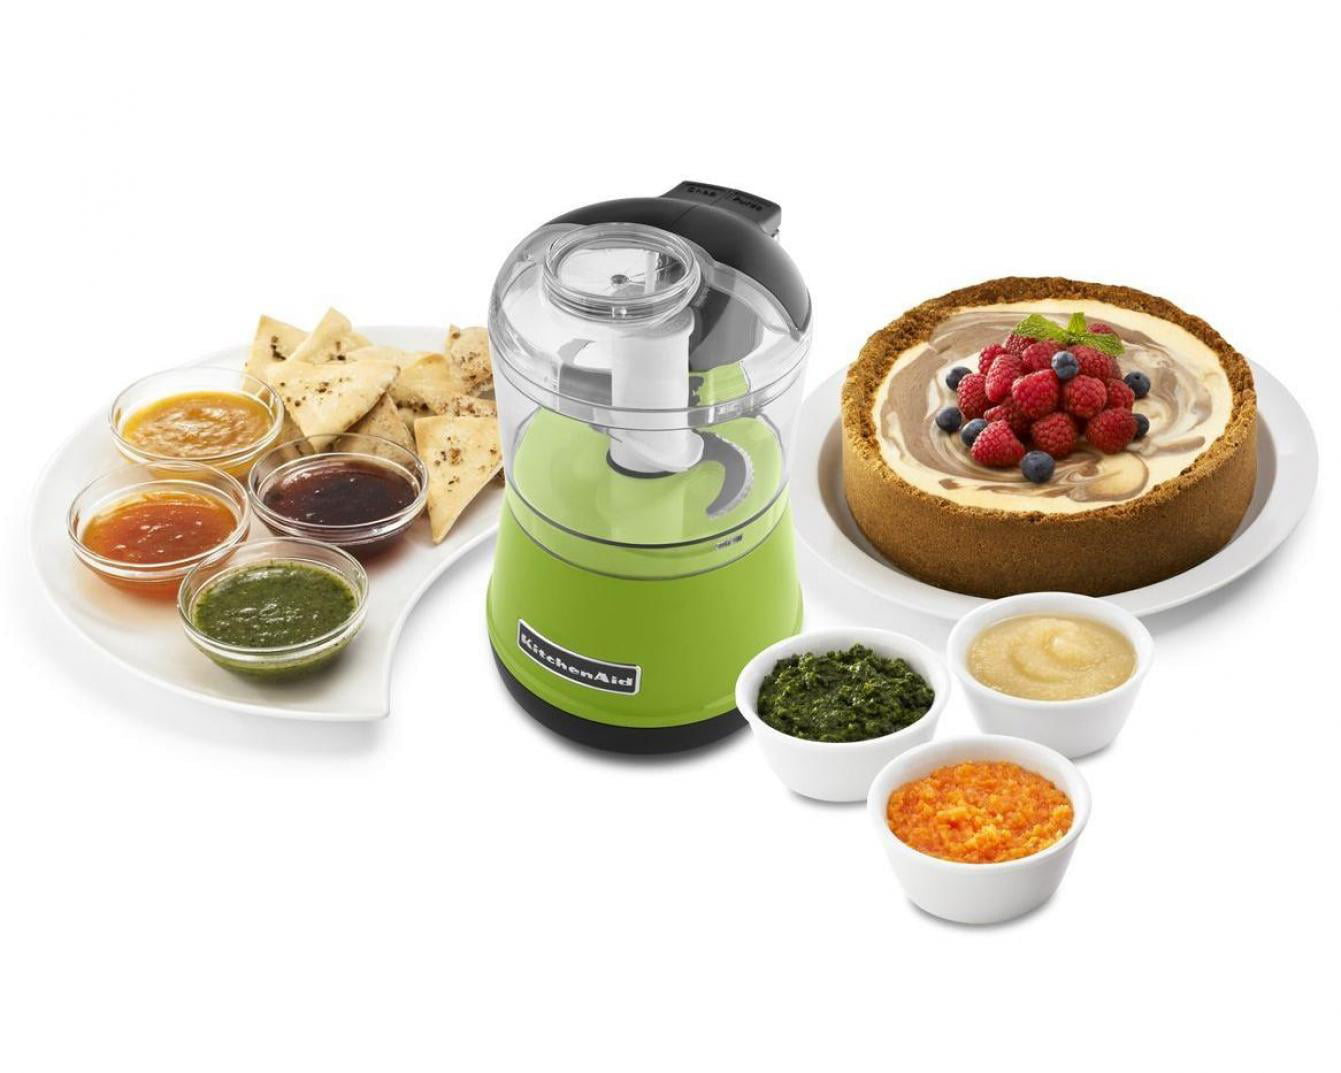 KitchenAid Food Processor, Chop, mix or puree the daily use ingredients  with KitchenAid 3.5 Cup Food Chopper to save prep time and clean up time.  #FoodChopper #KitchenAid, By KitchenAid India